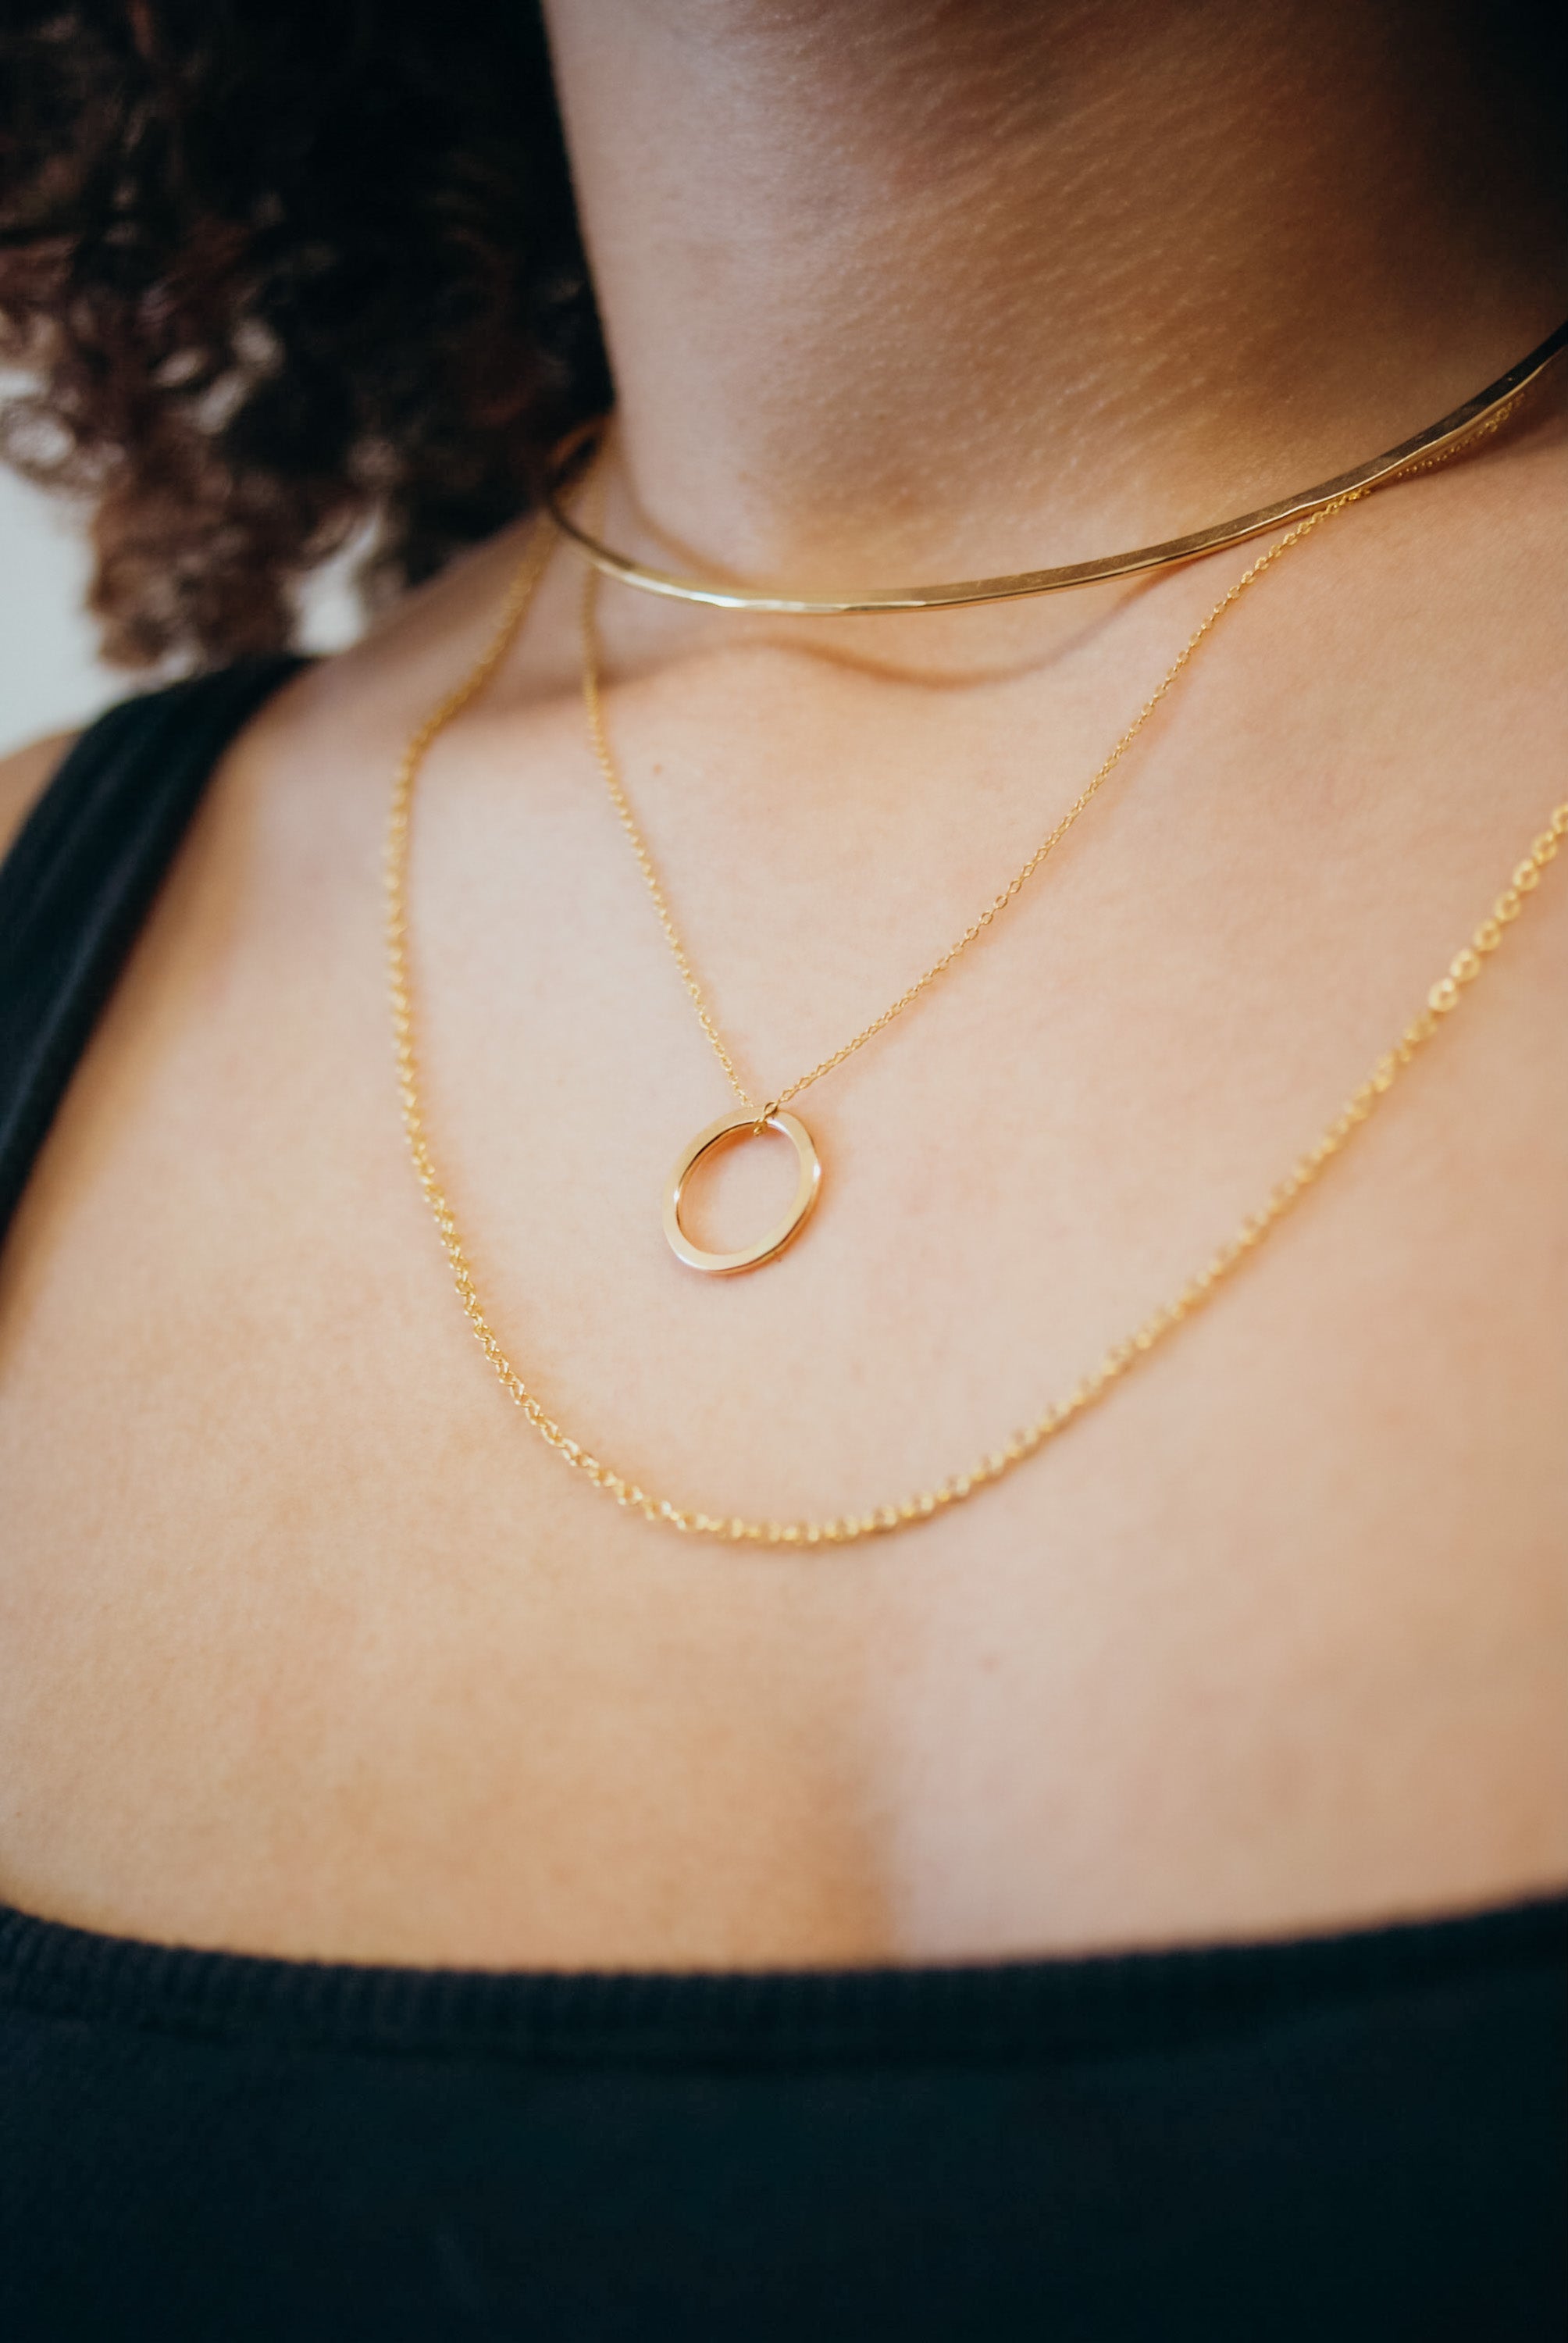 Mini Circle Pendant in Gold Fill, Rose Gold Fill, or Sterling